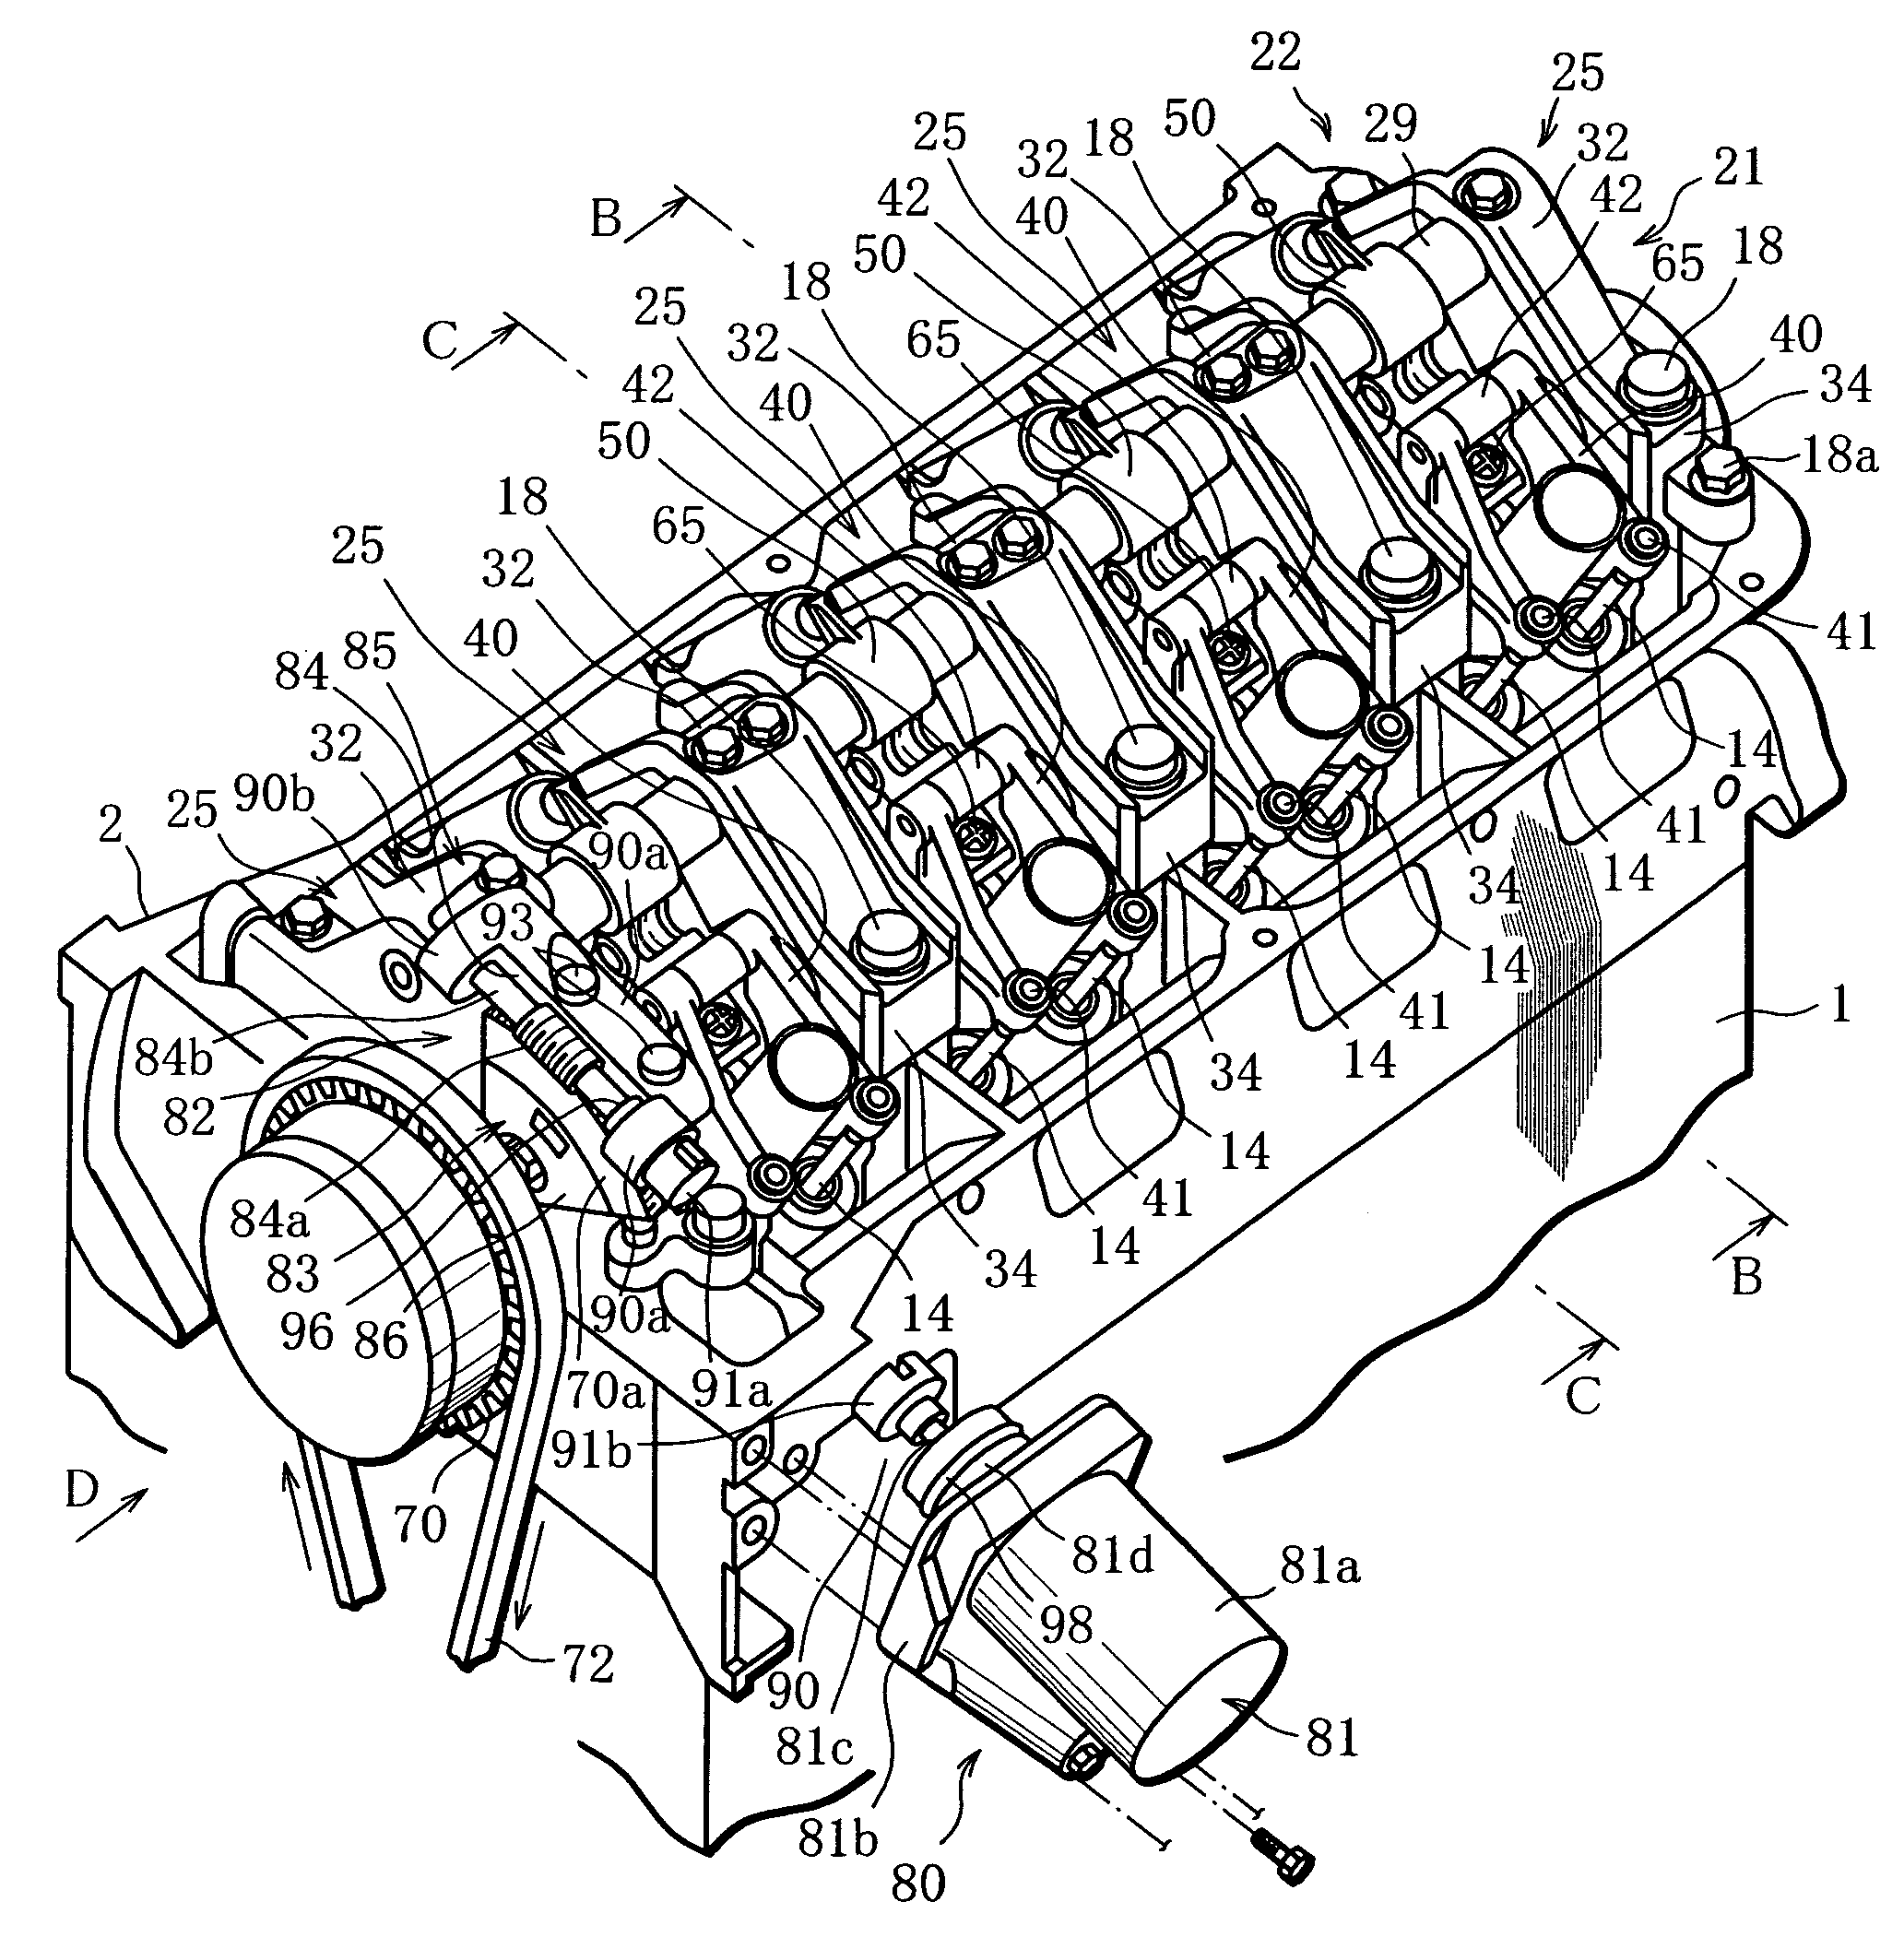 Variable valve train system for internal combustion engine